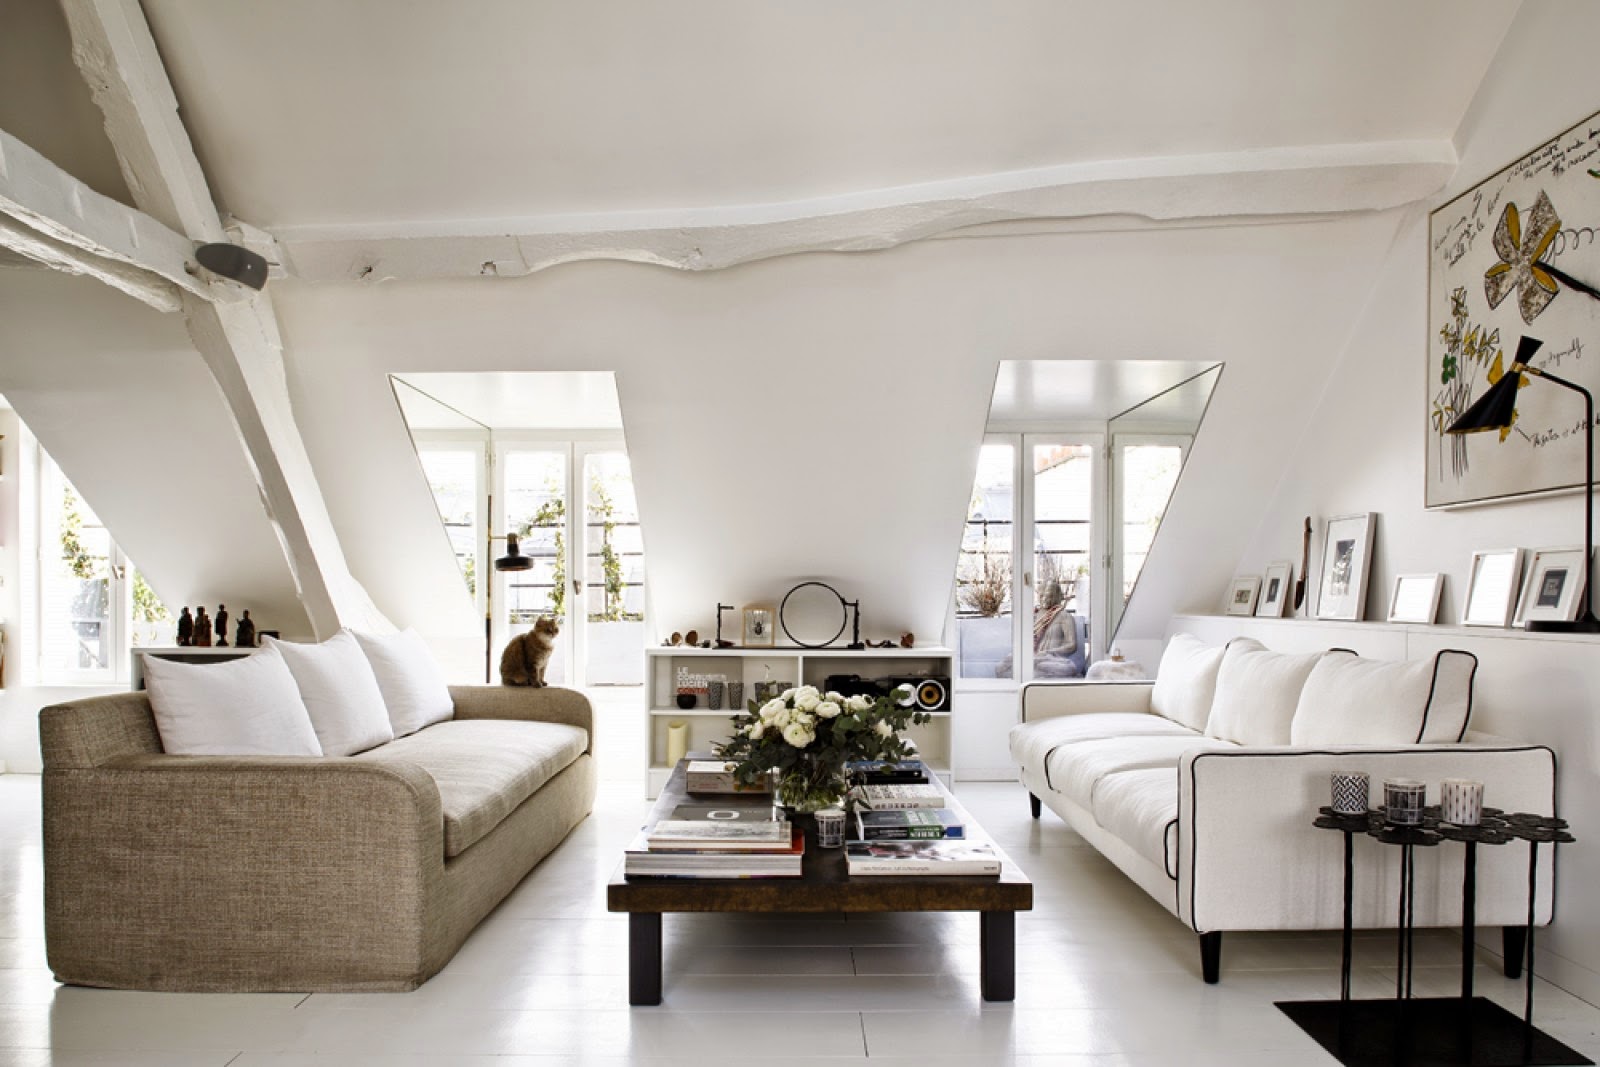 Living room in a Paris attic apartment with dueling sofas and yellow and black accents